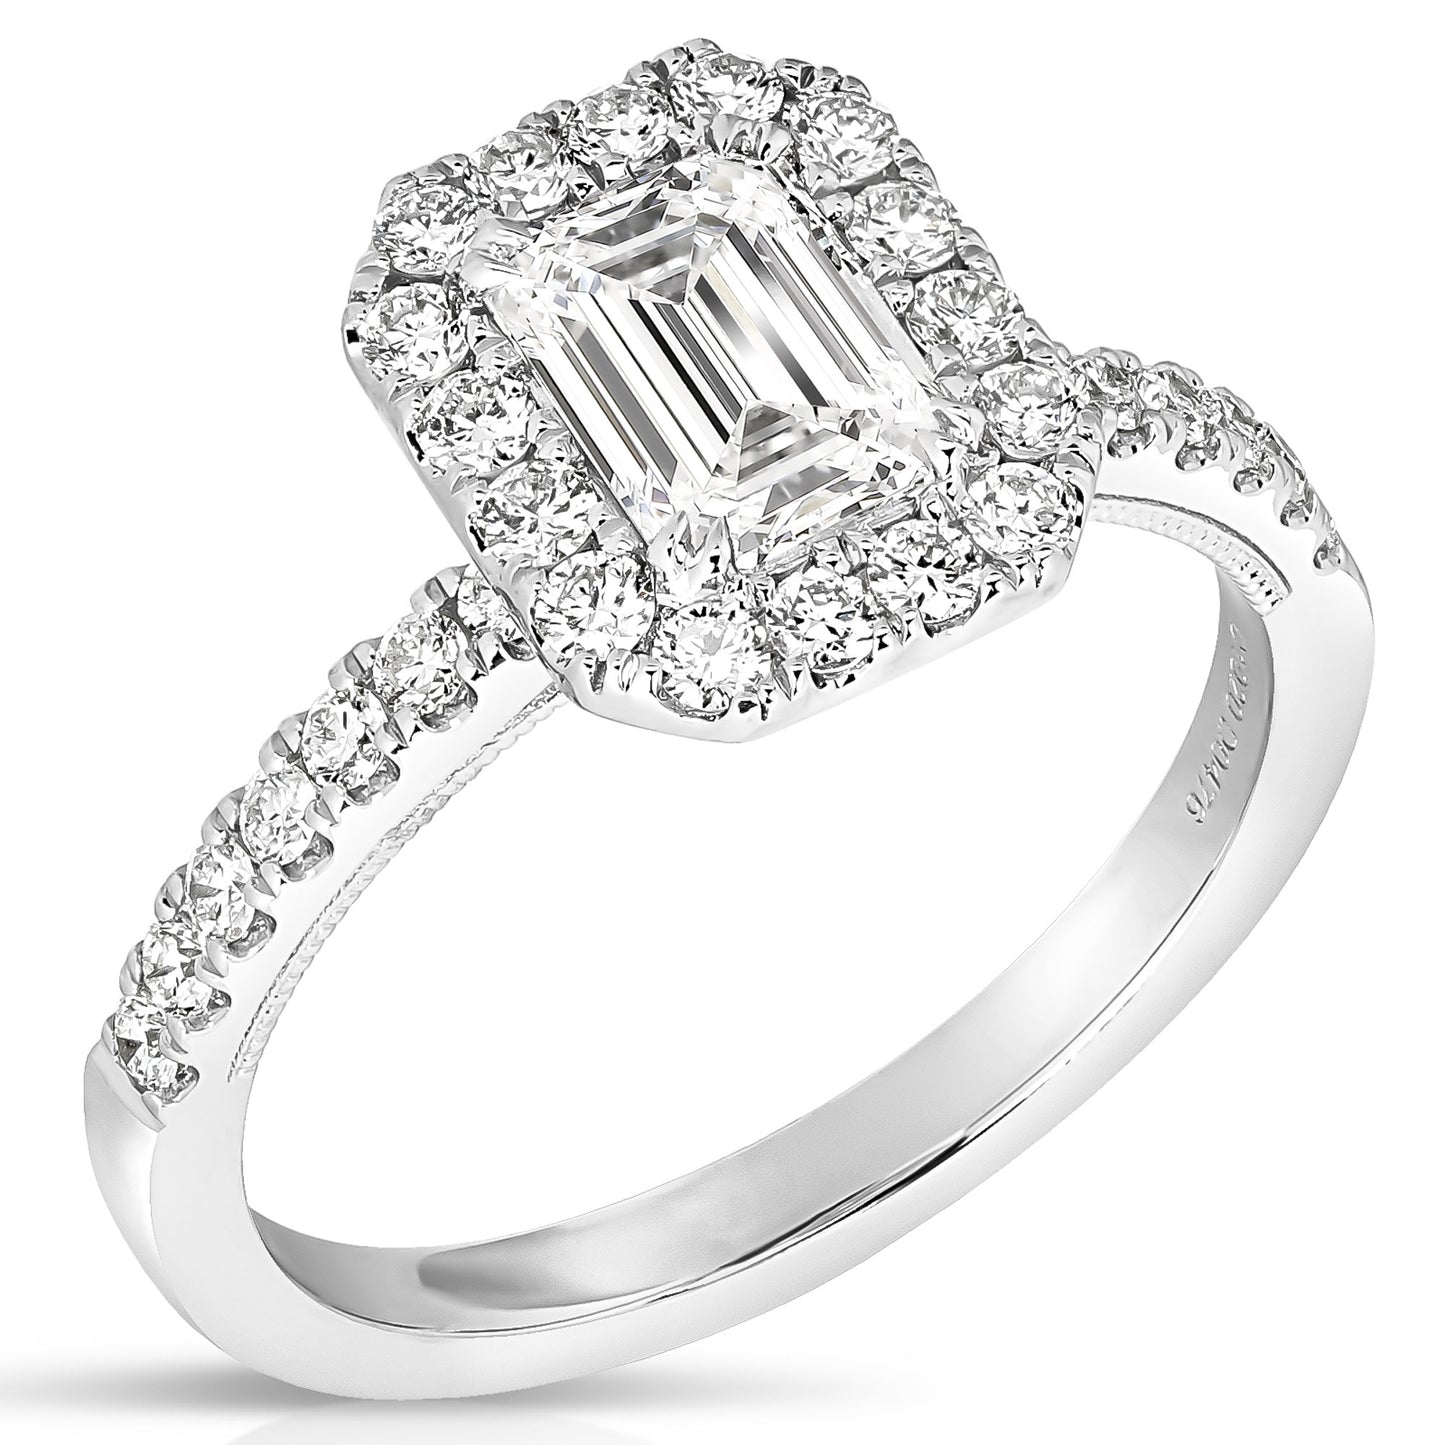 1 1/2 CT CENTER EMERALD CUT HALO LAB GROWN ENGAGEMENT RING